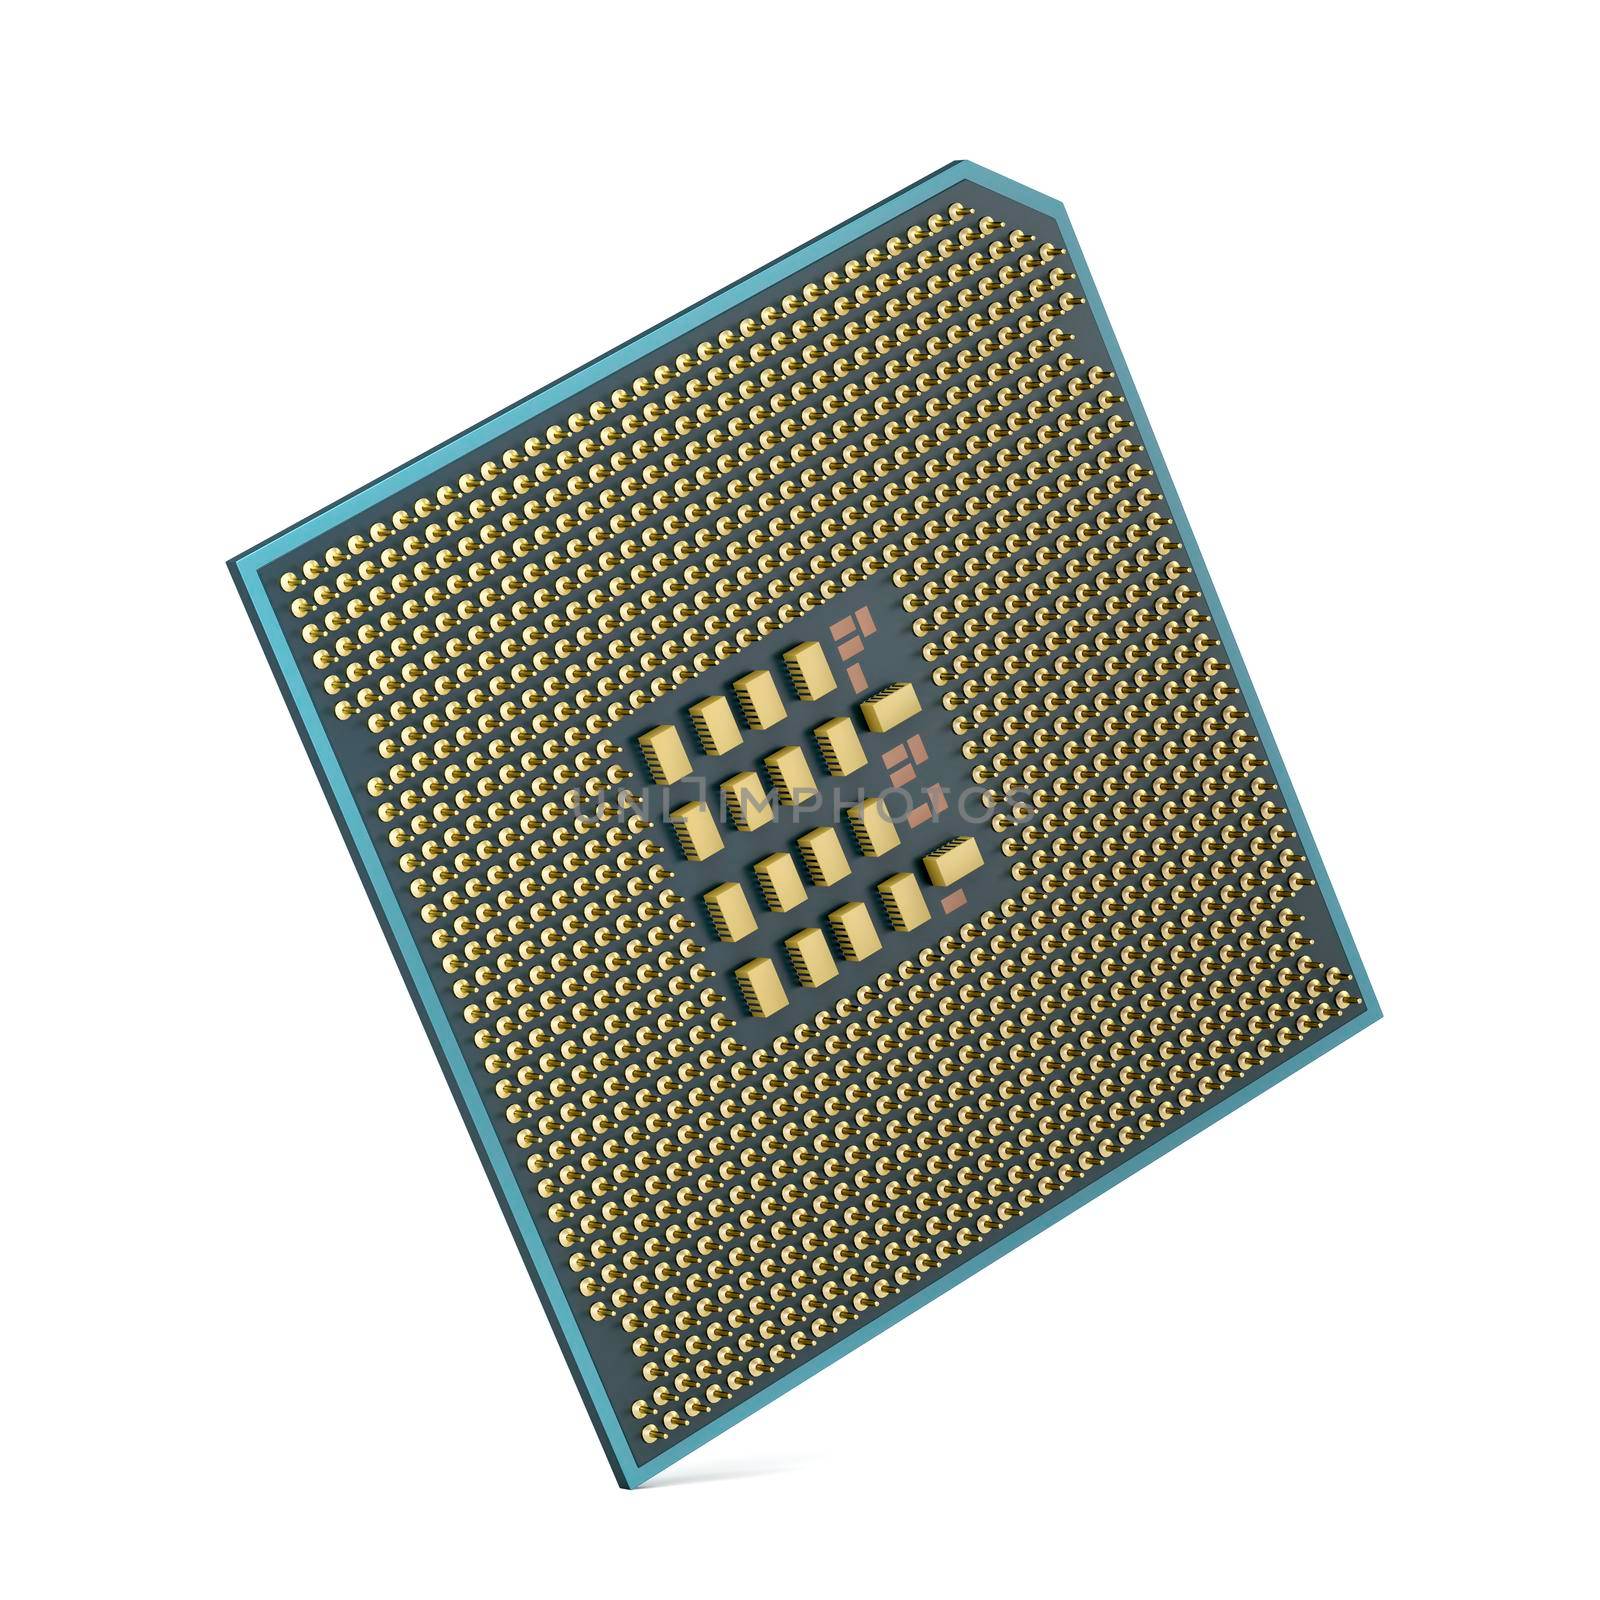 Modern computer processor by magraphics